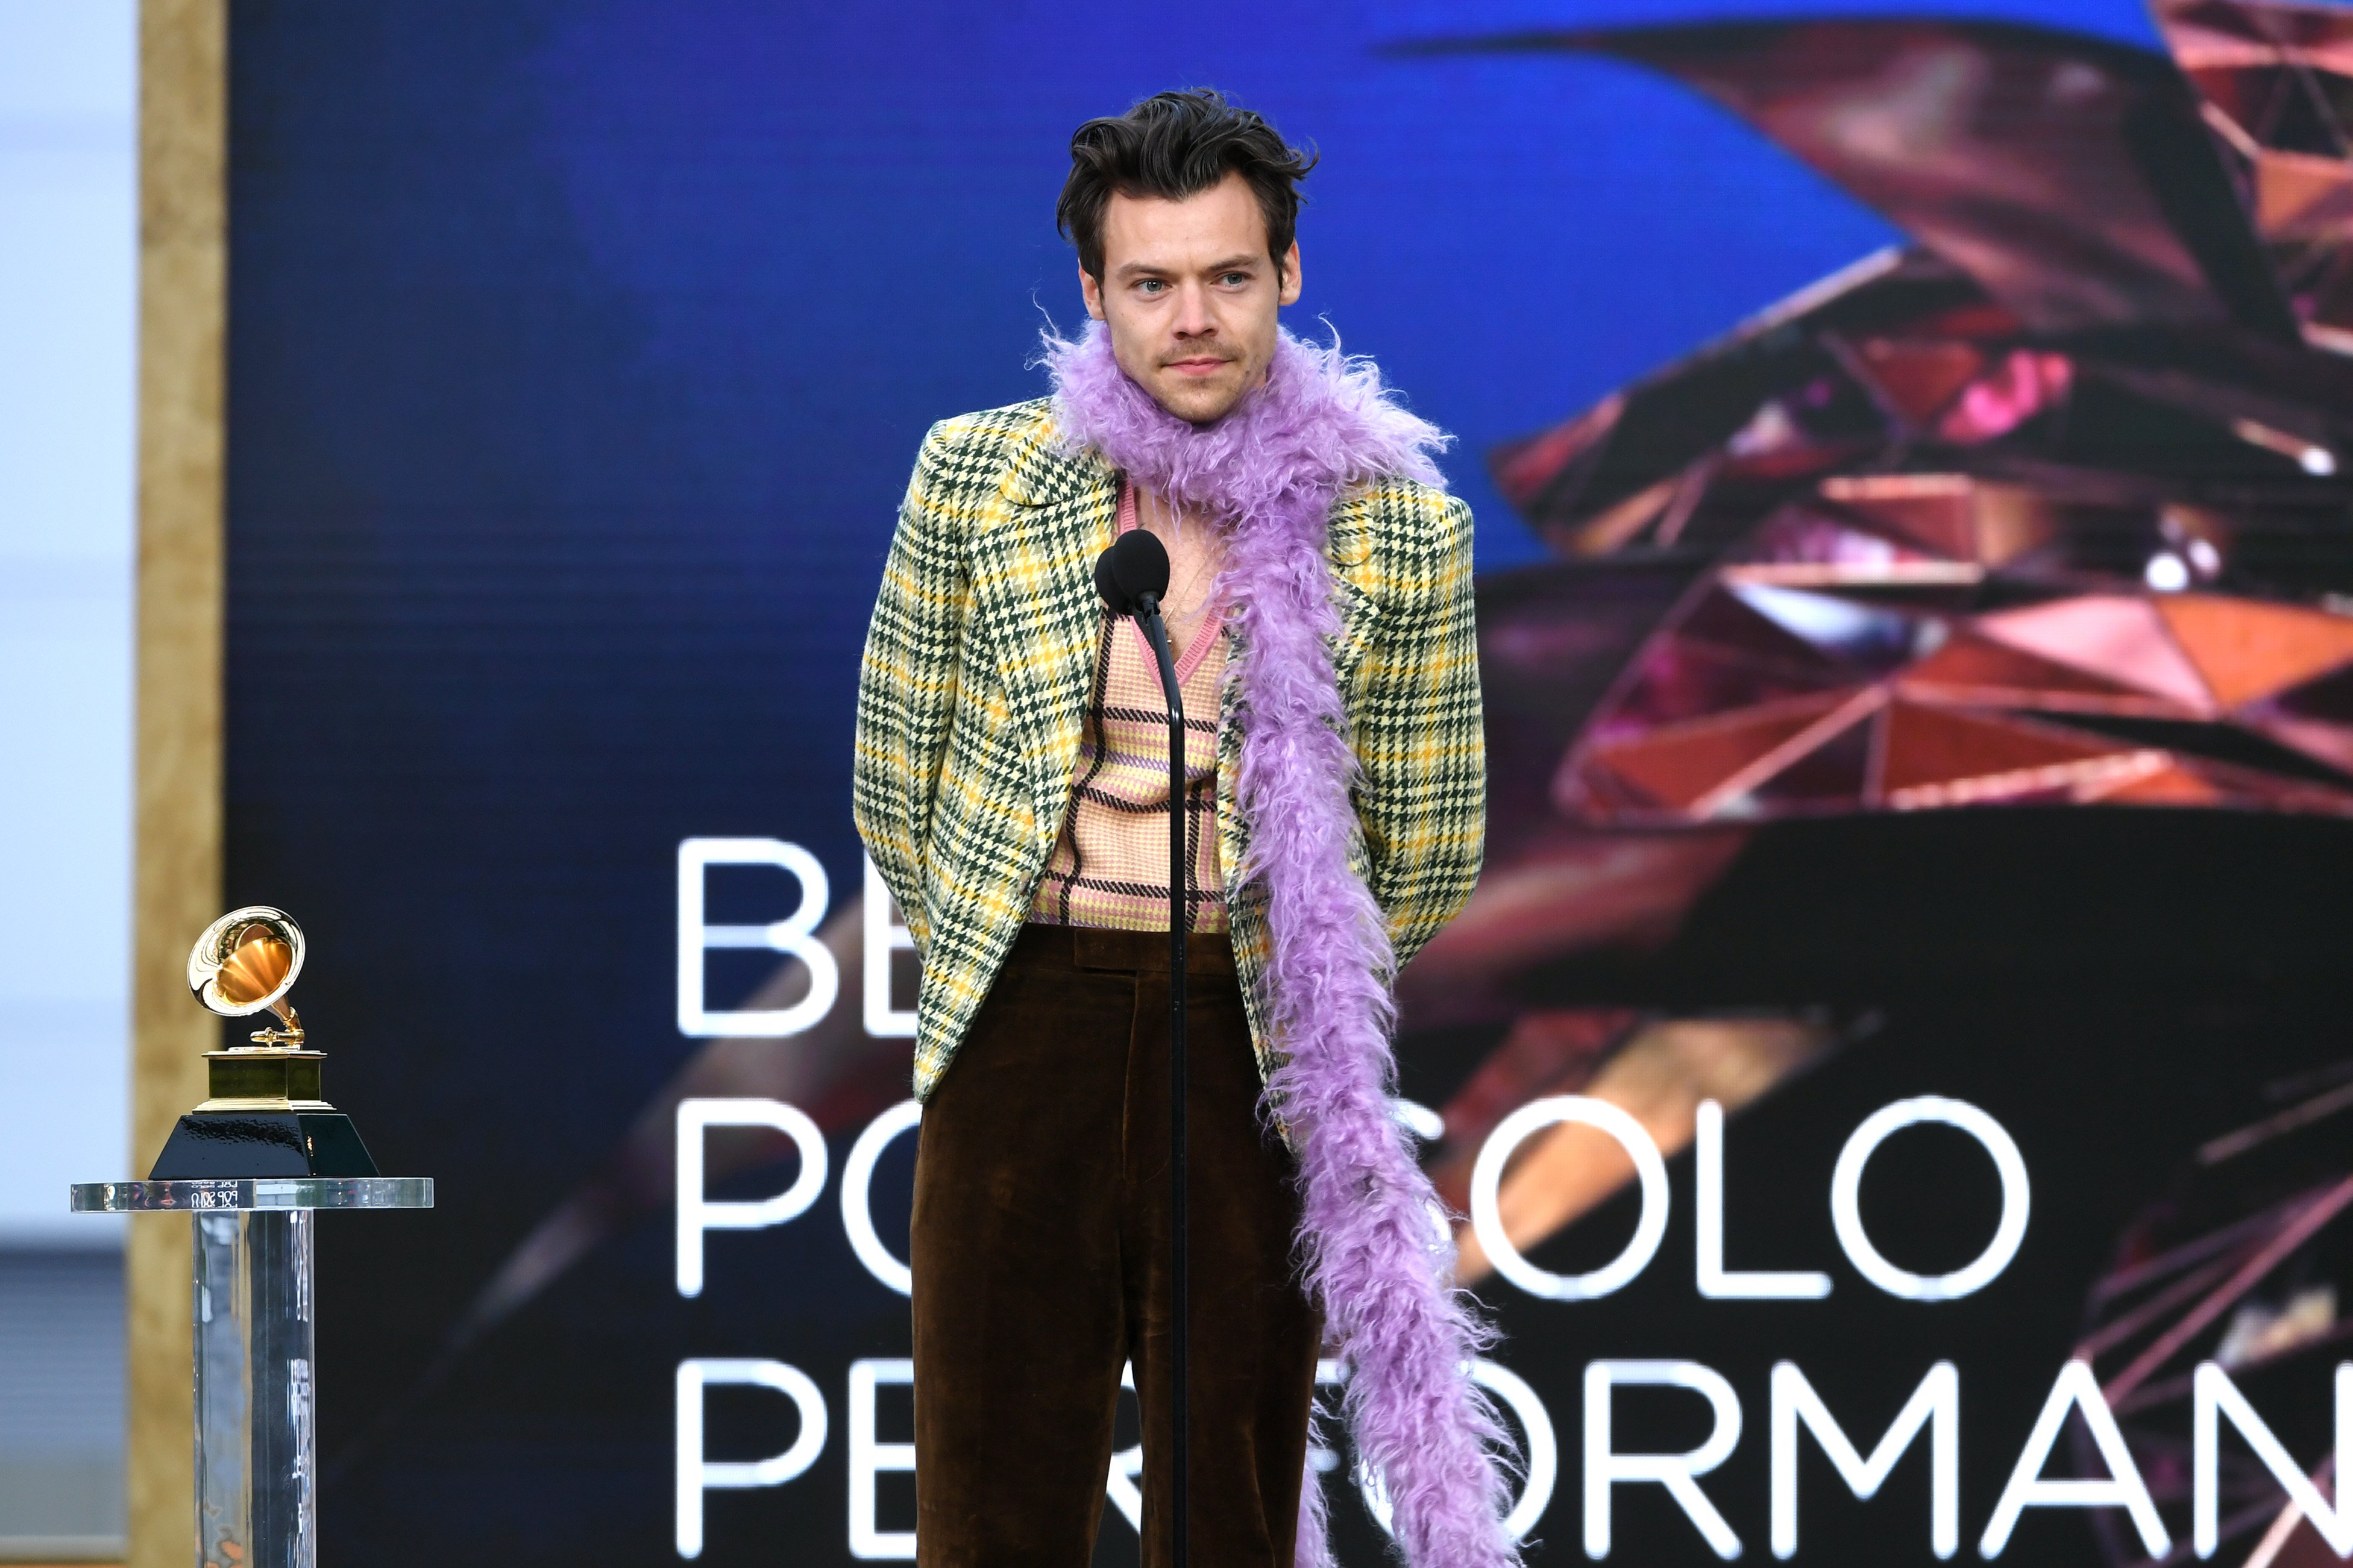 Harry Styles accepts the Best Pop Solo Performance award for 'Watermelon Sugar' during the 63rd Annual Grammy Awards